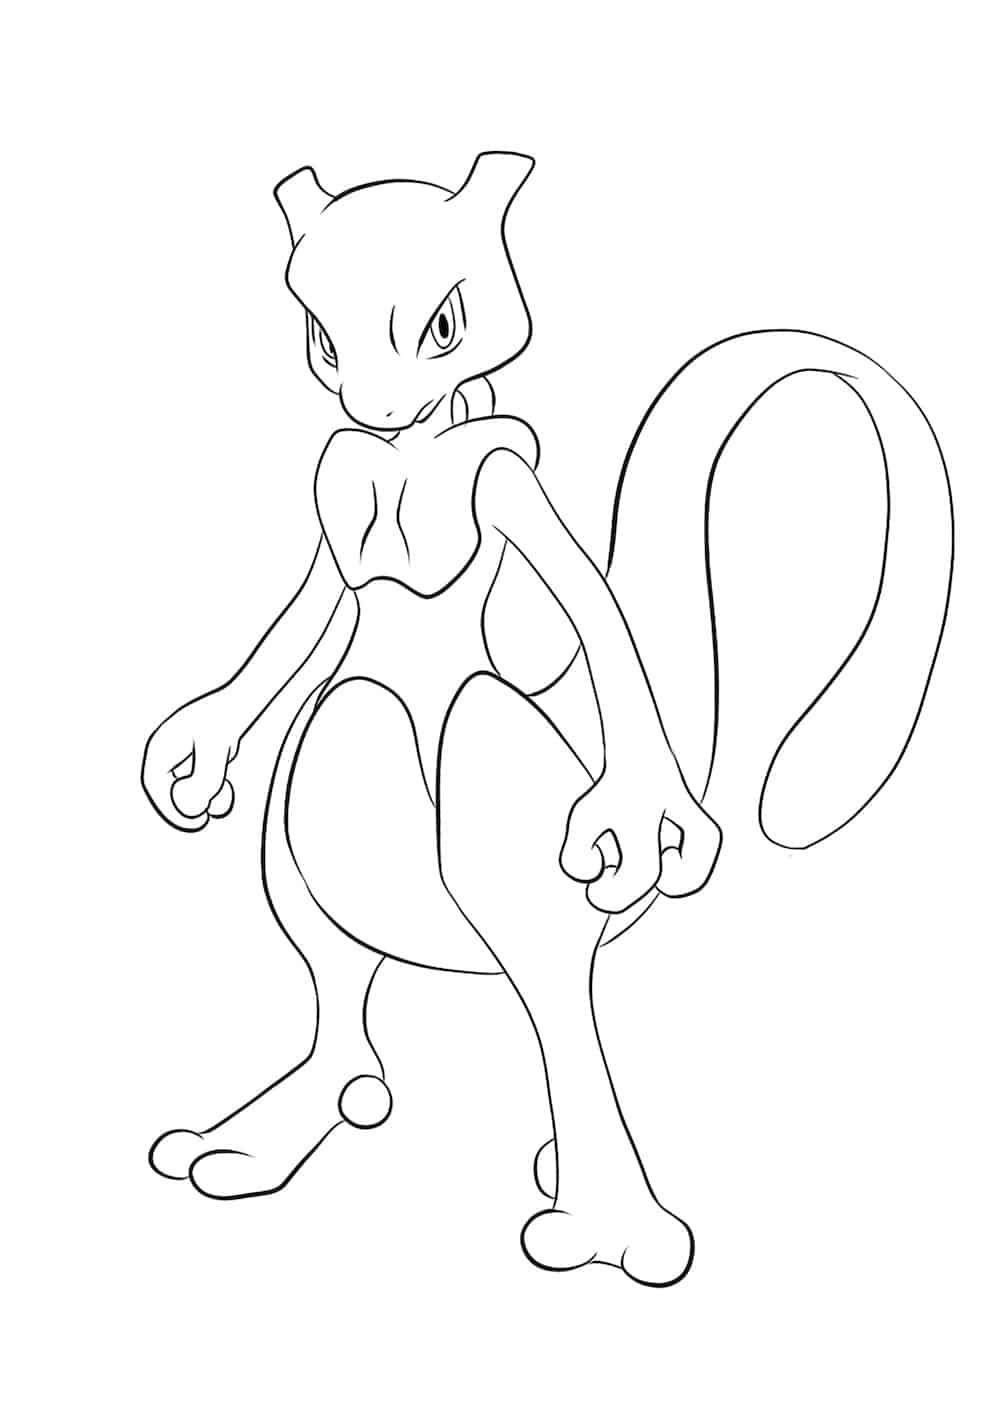 mewtwo coloring pages